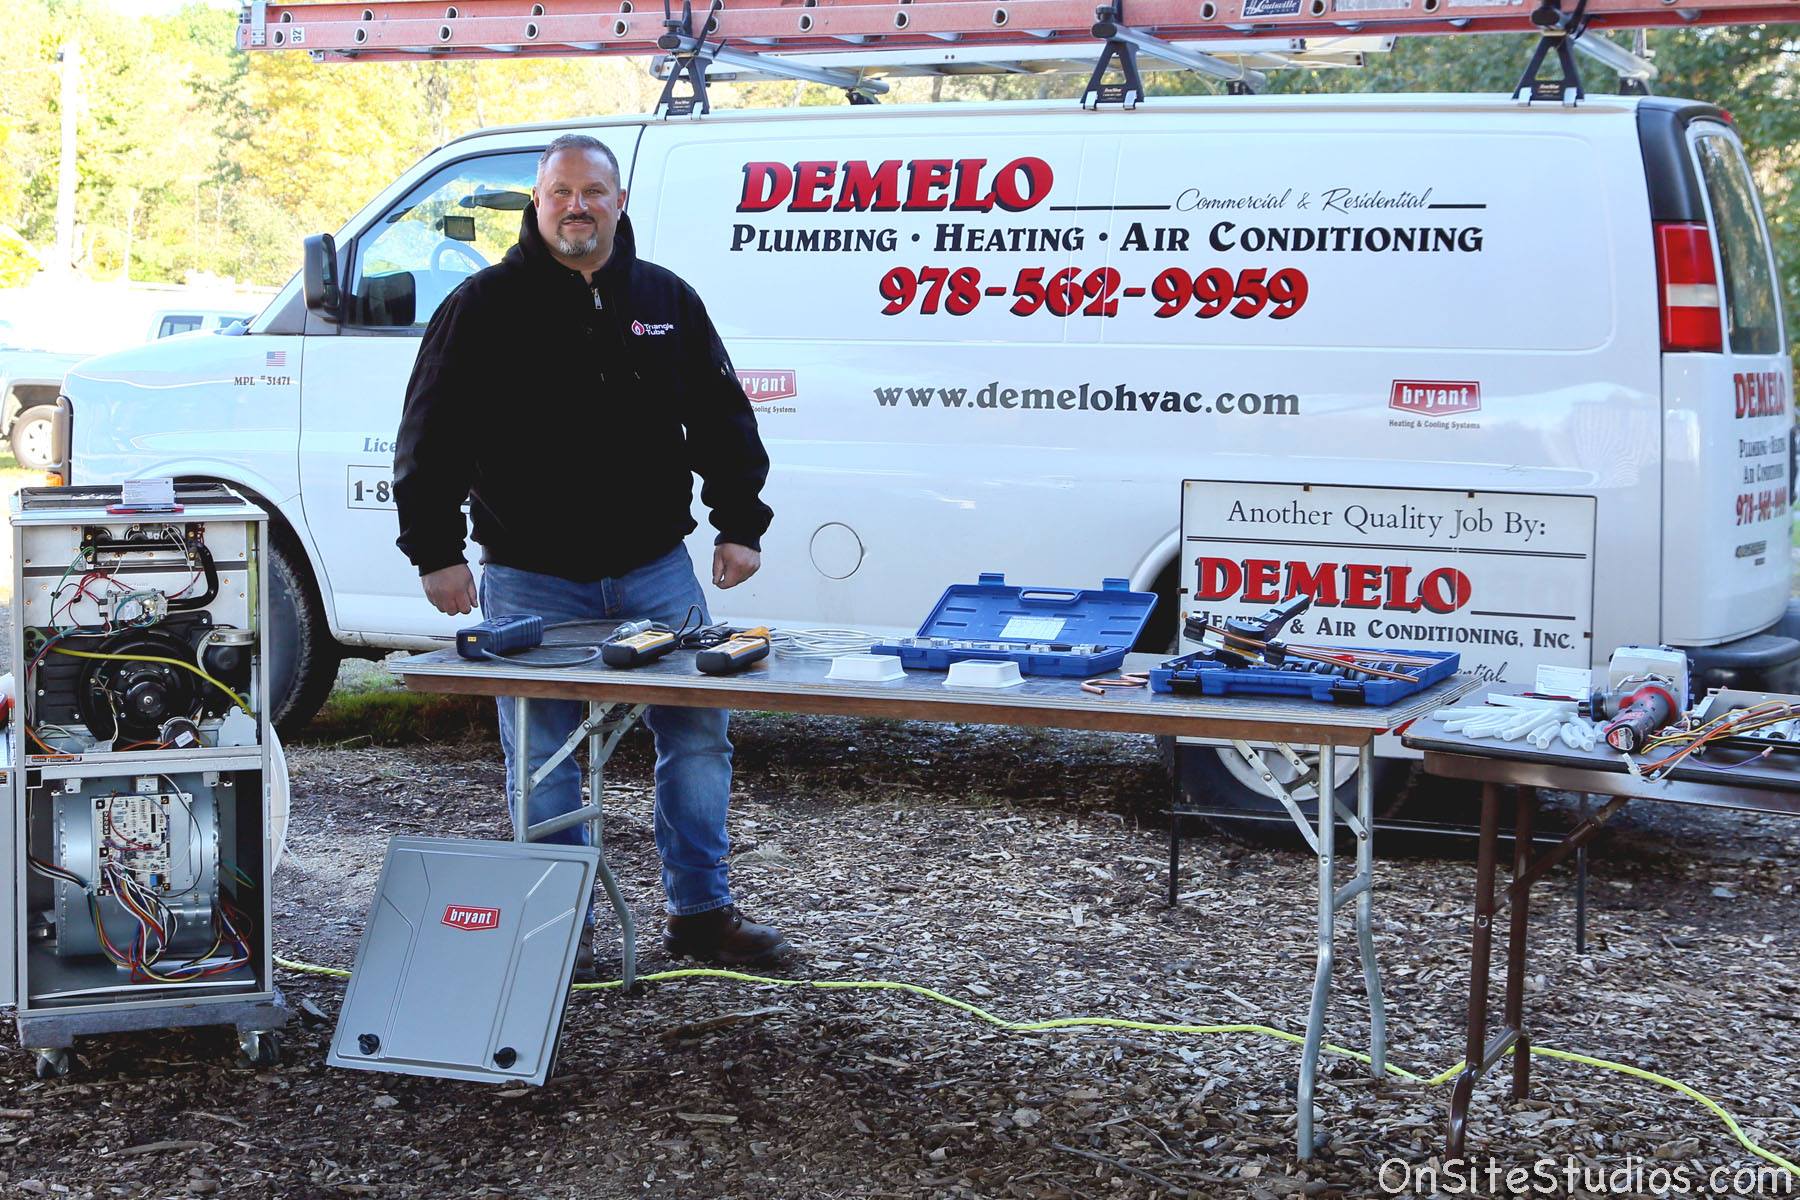 Demelo Heating & Air Conditioning Inc